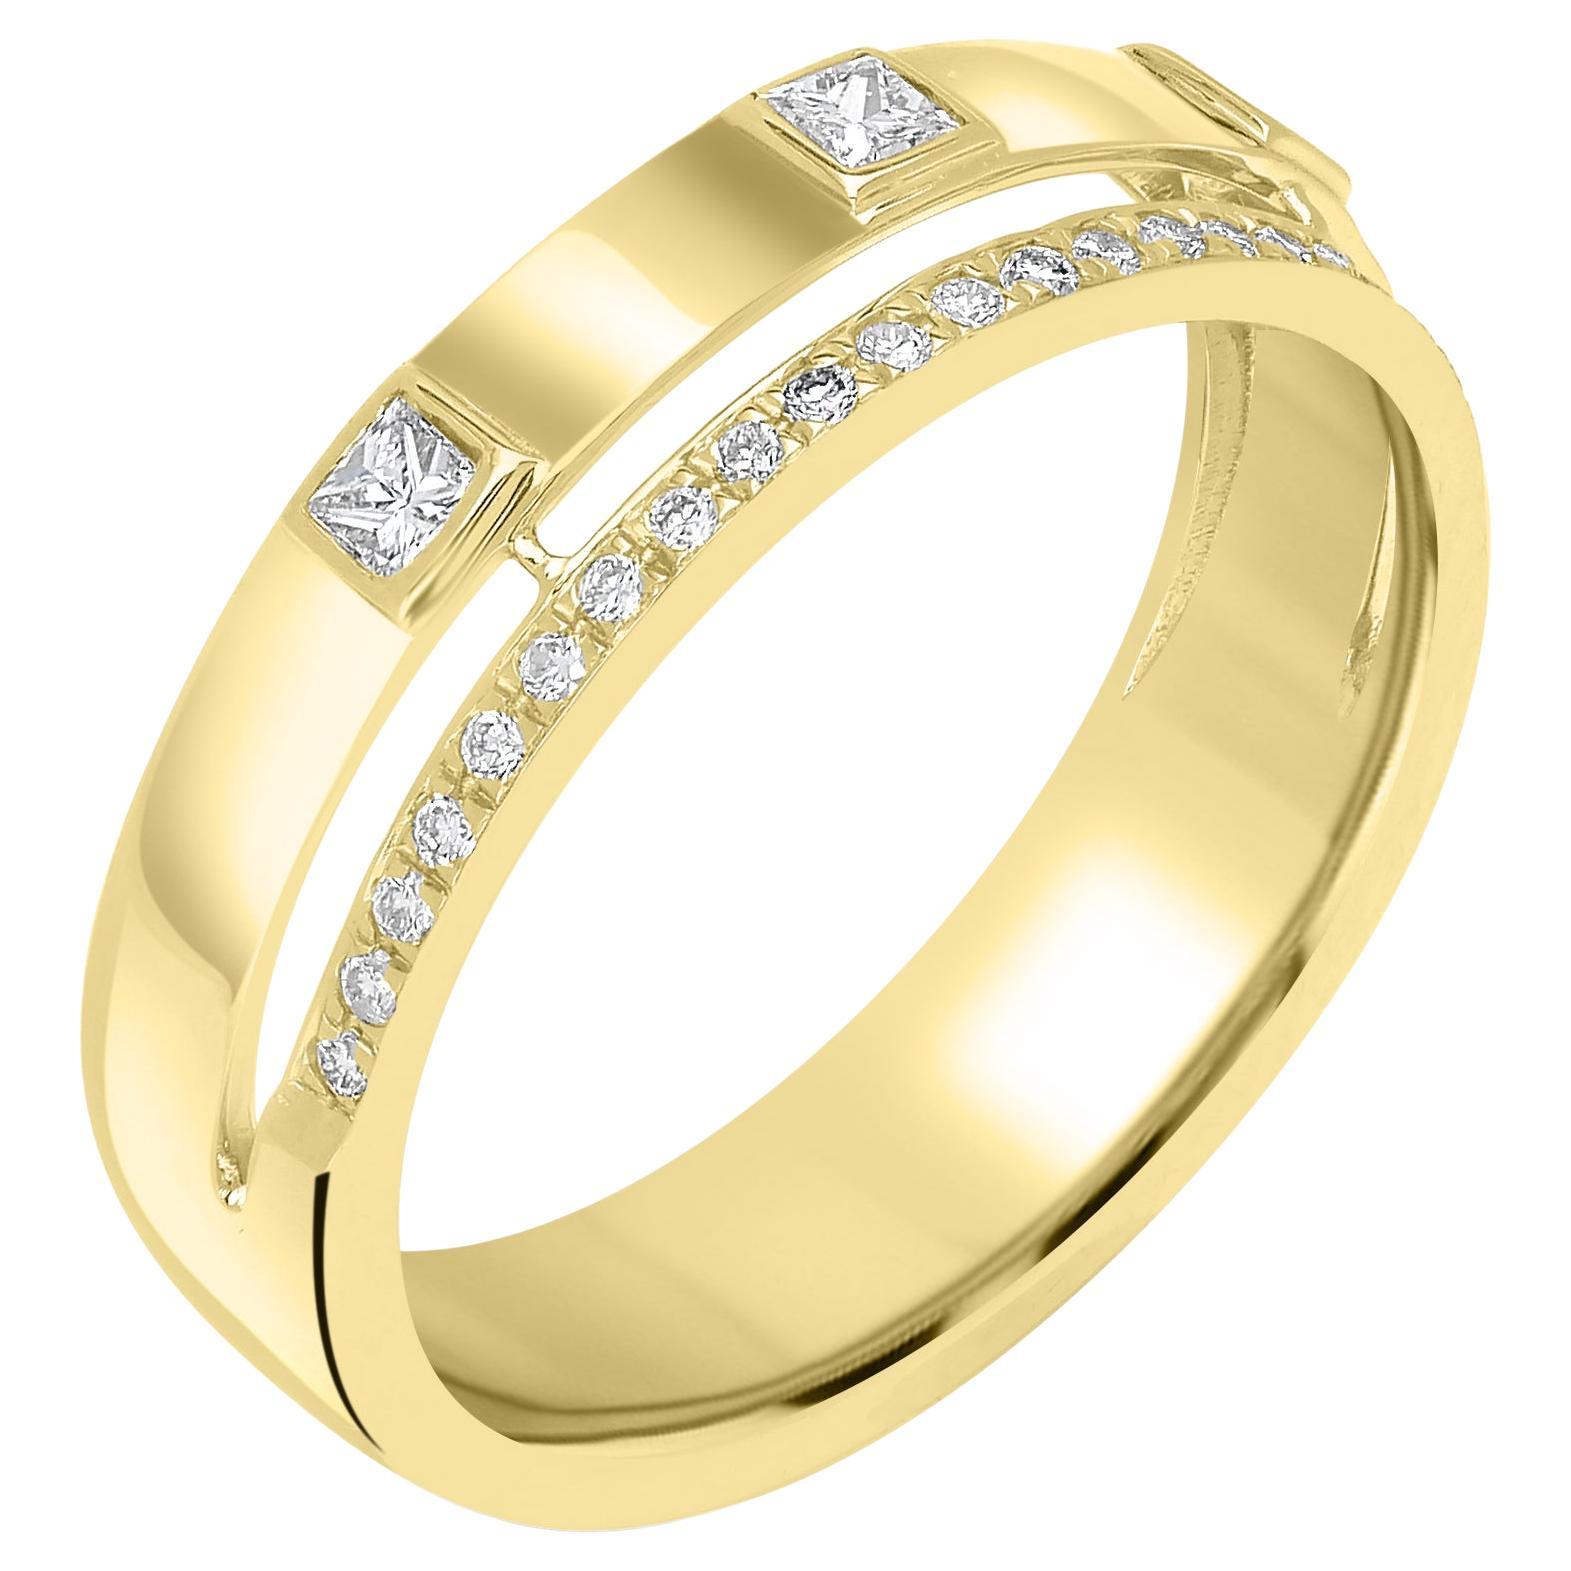 Luxle 0.25 Ct. T.W Diamond Band Ring in 14k Yellow Gold For Sale